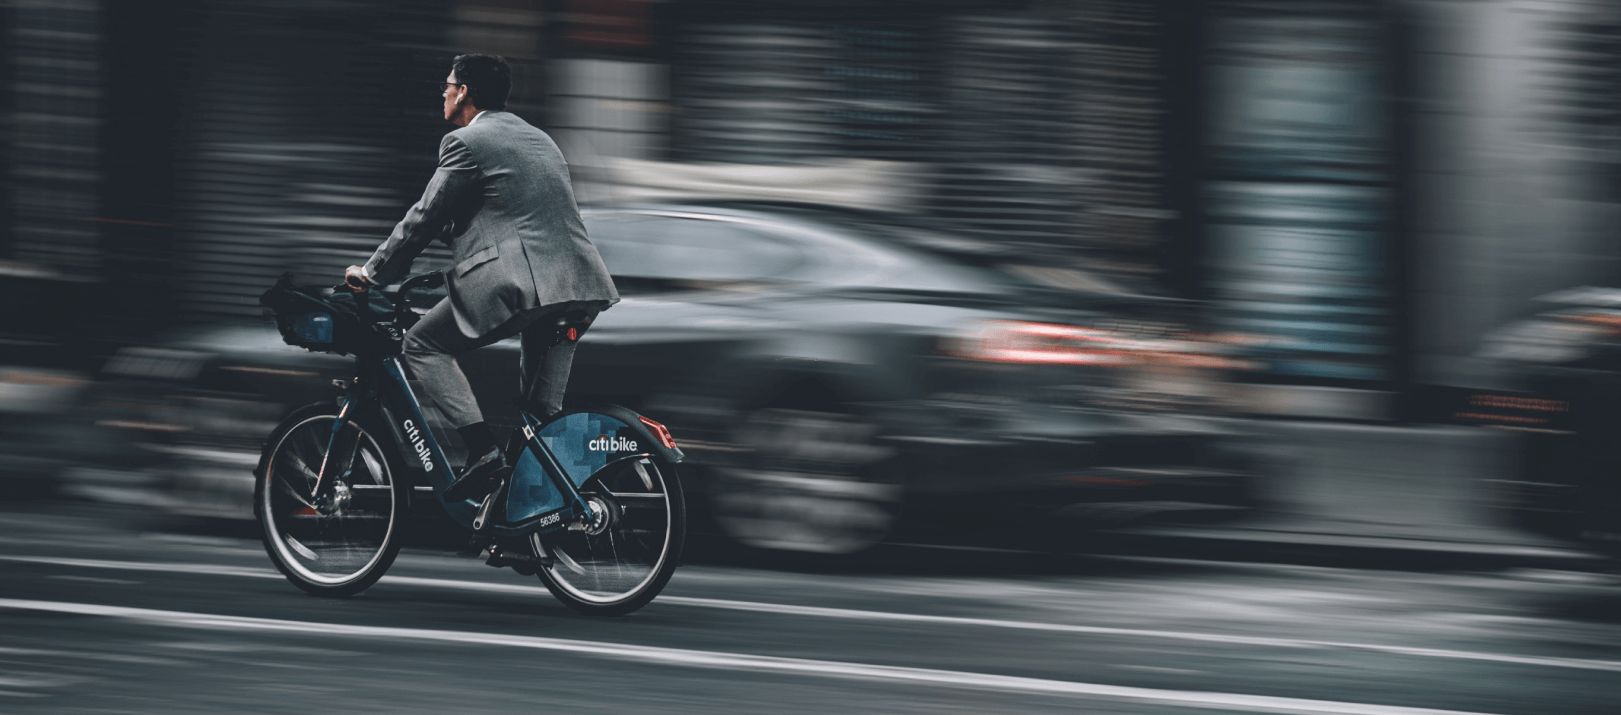 Man in a suit on a bicycle